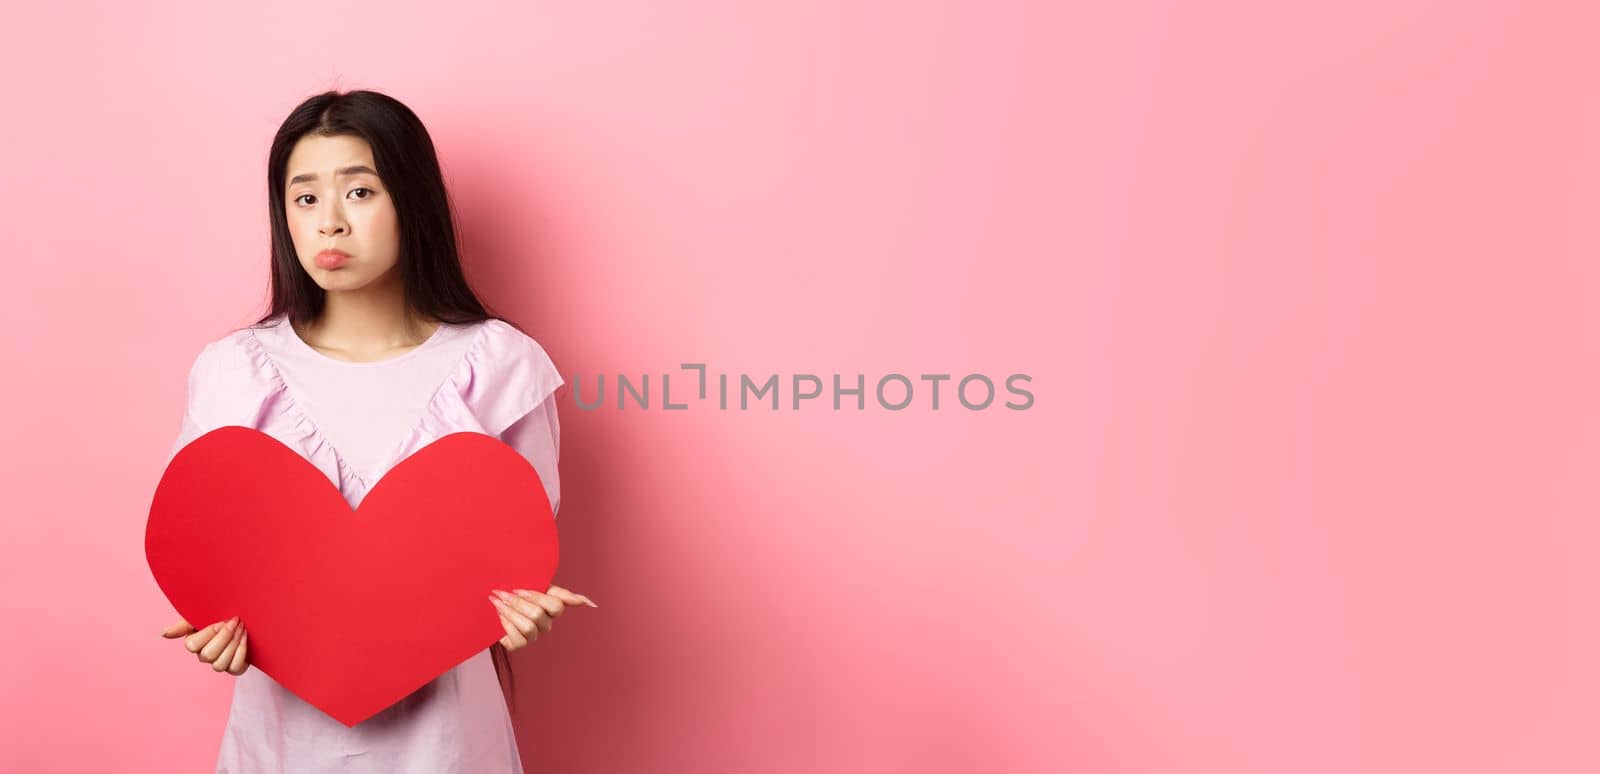 Valentines concept. Single teenage asian girl wants to fall in love, looking sad and lonely at camera, sulking distressed on lovers day, holding big red heart cutout, pink background.